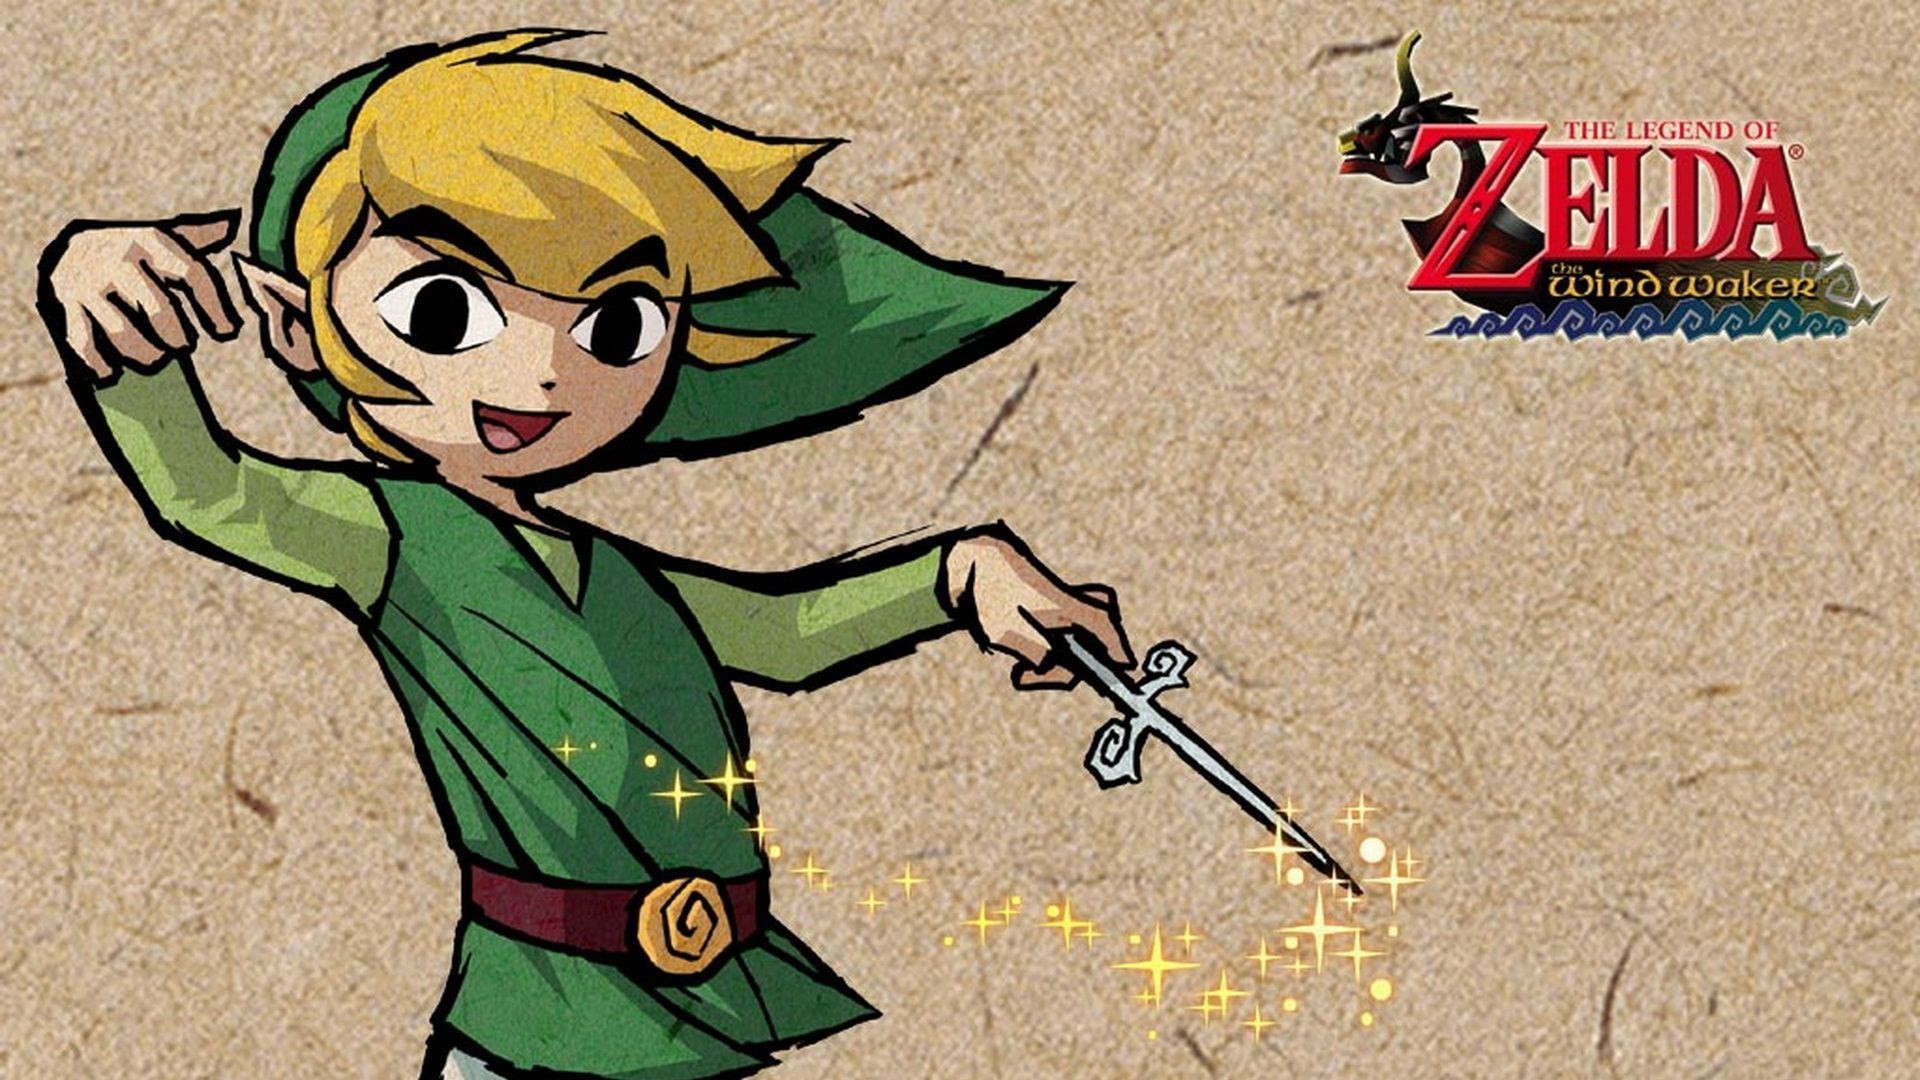 1920x1080 the legend of zelda the wind waker wallpapers 1080p high quality,   (425 kB